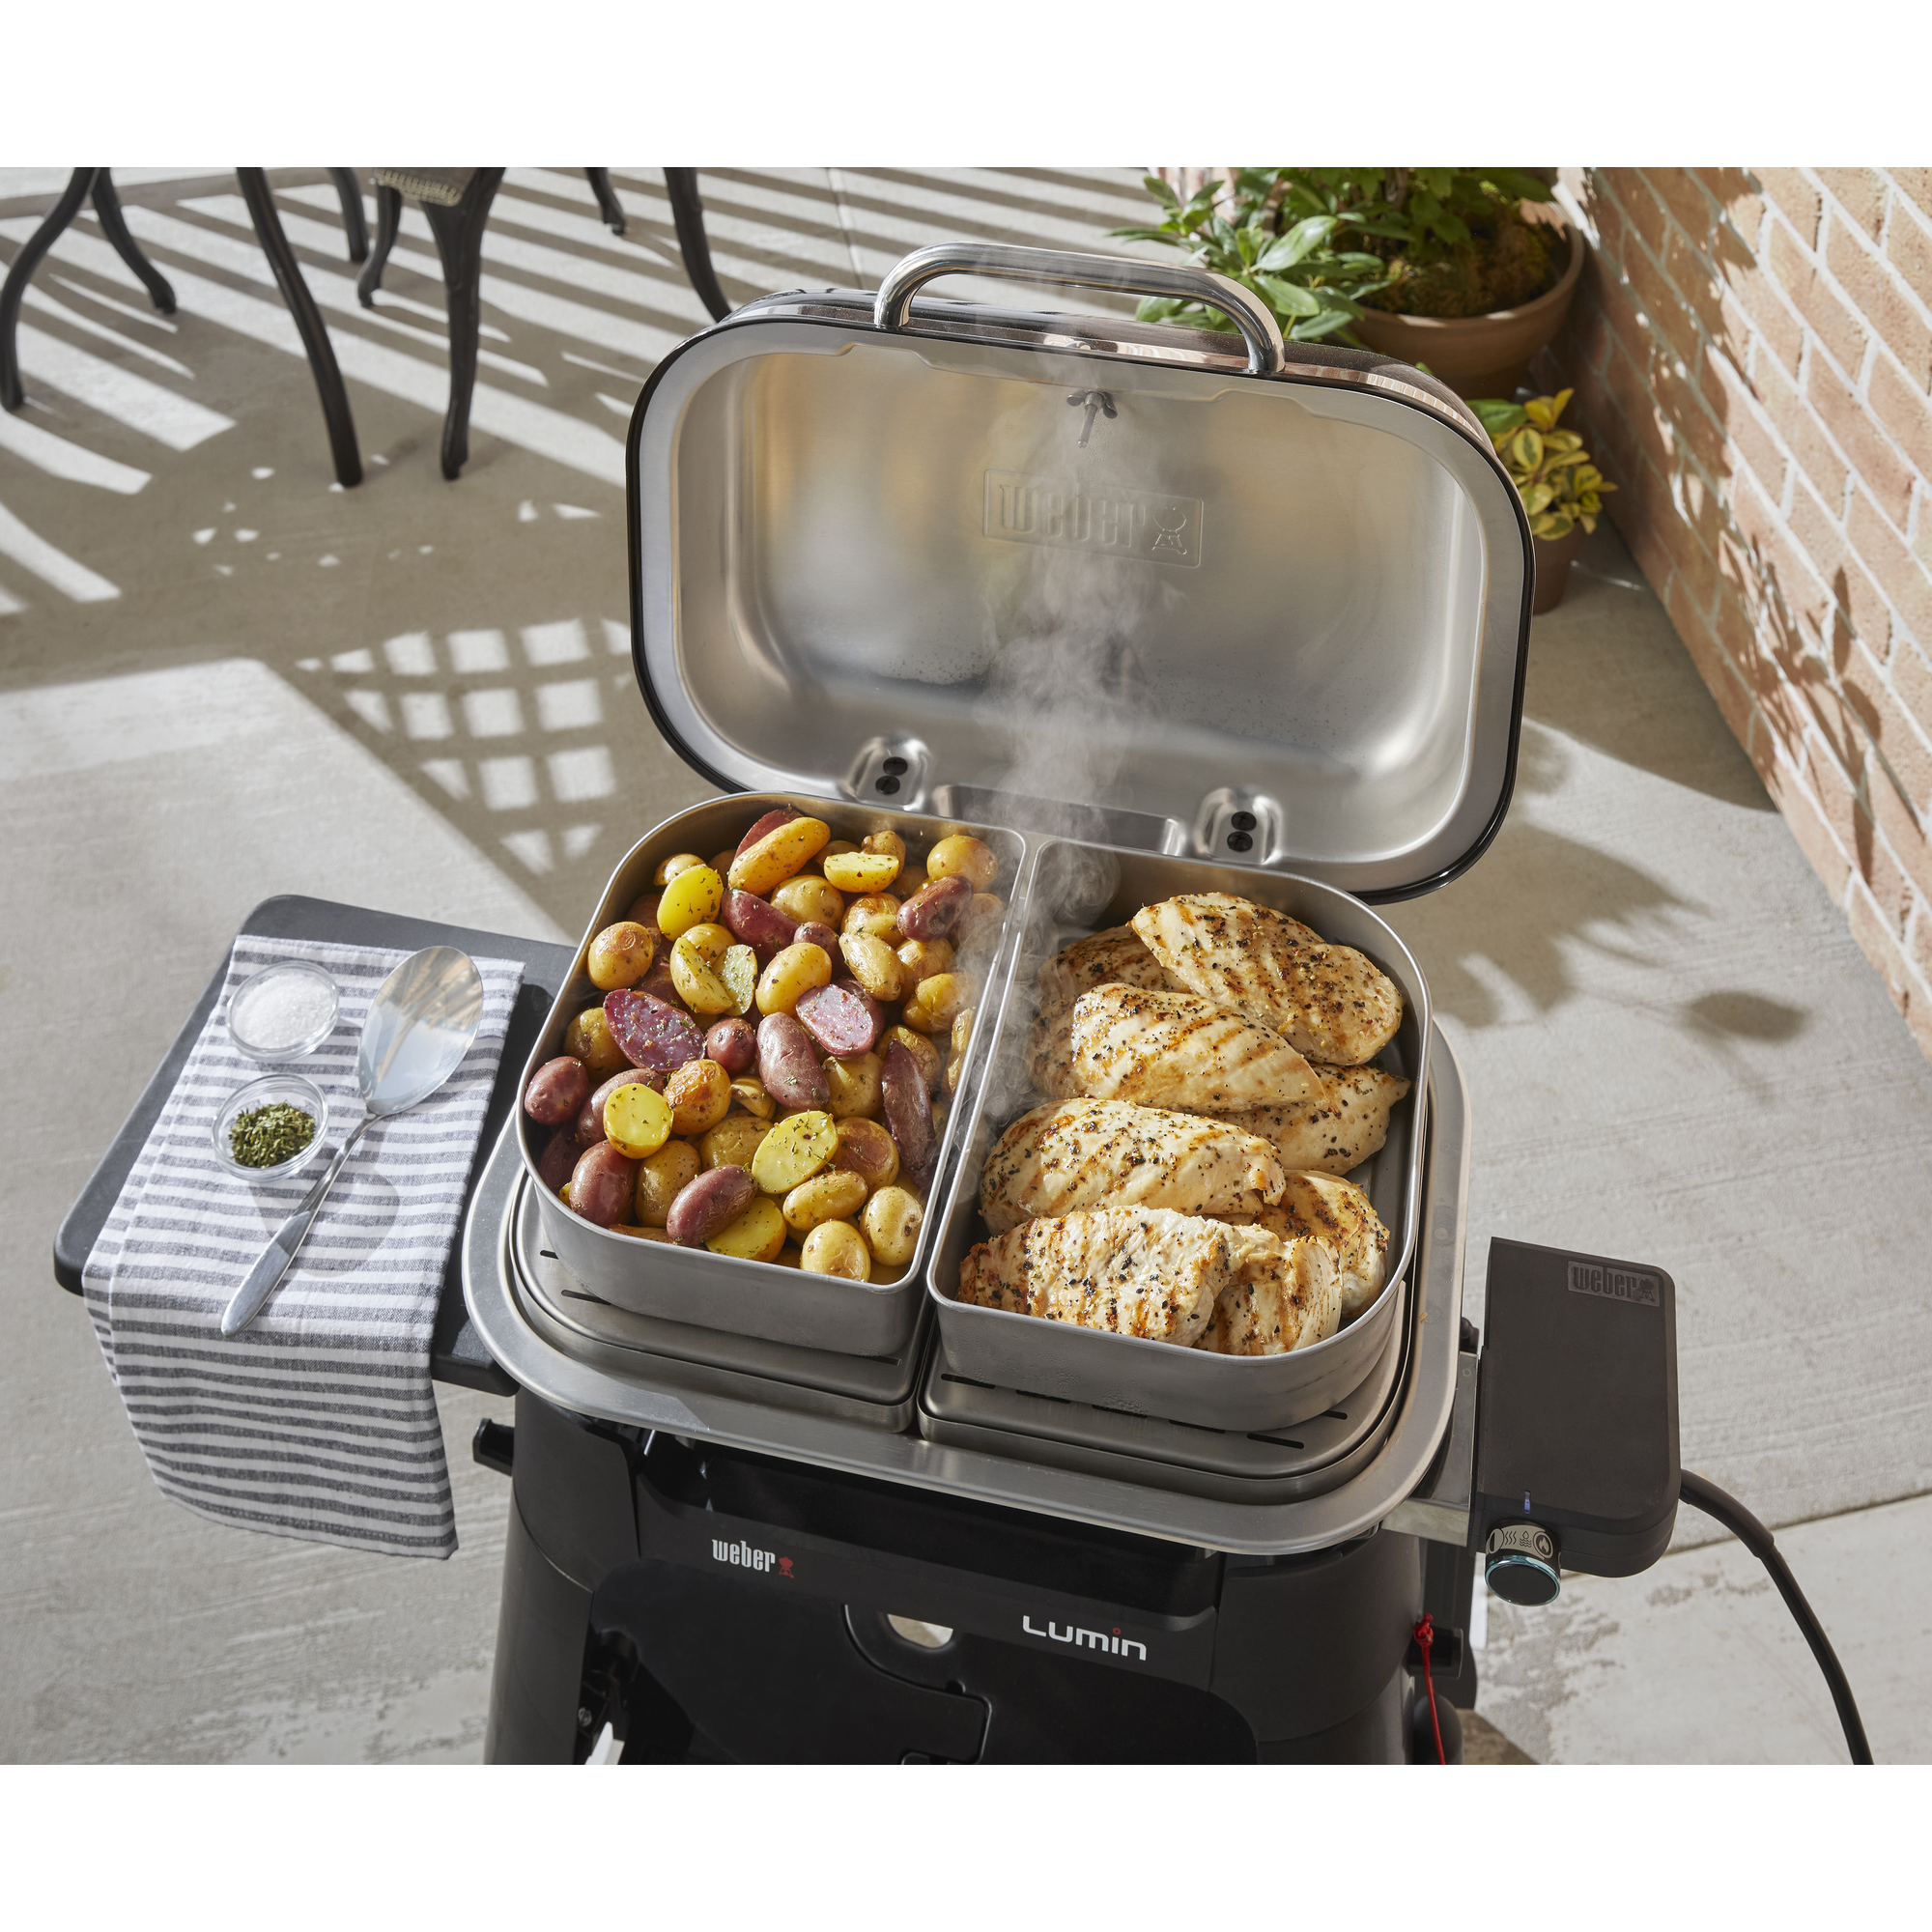 Multifunktions-Set für Lumin Compact Elektrogrill 4-teilig + product picture